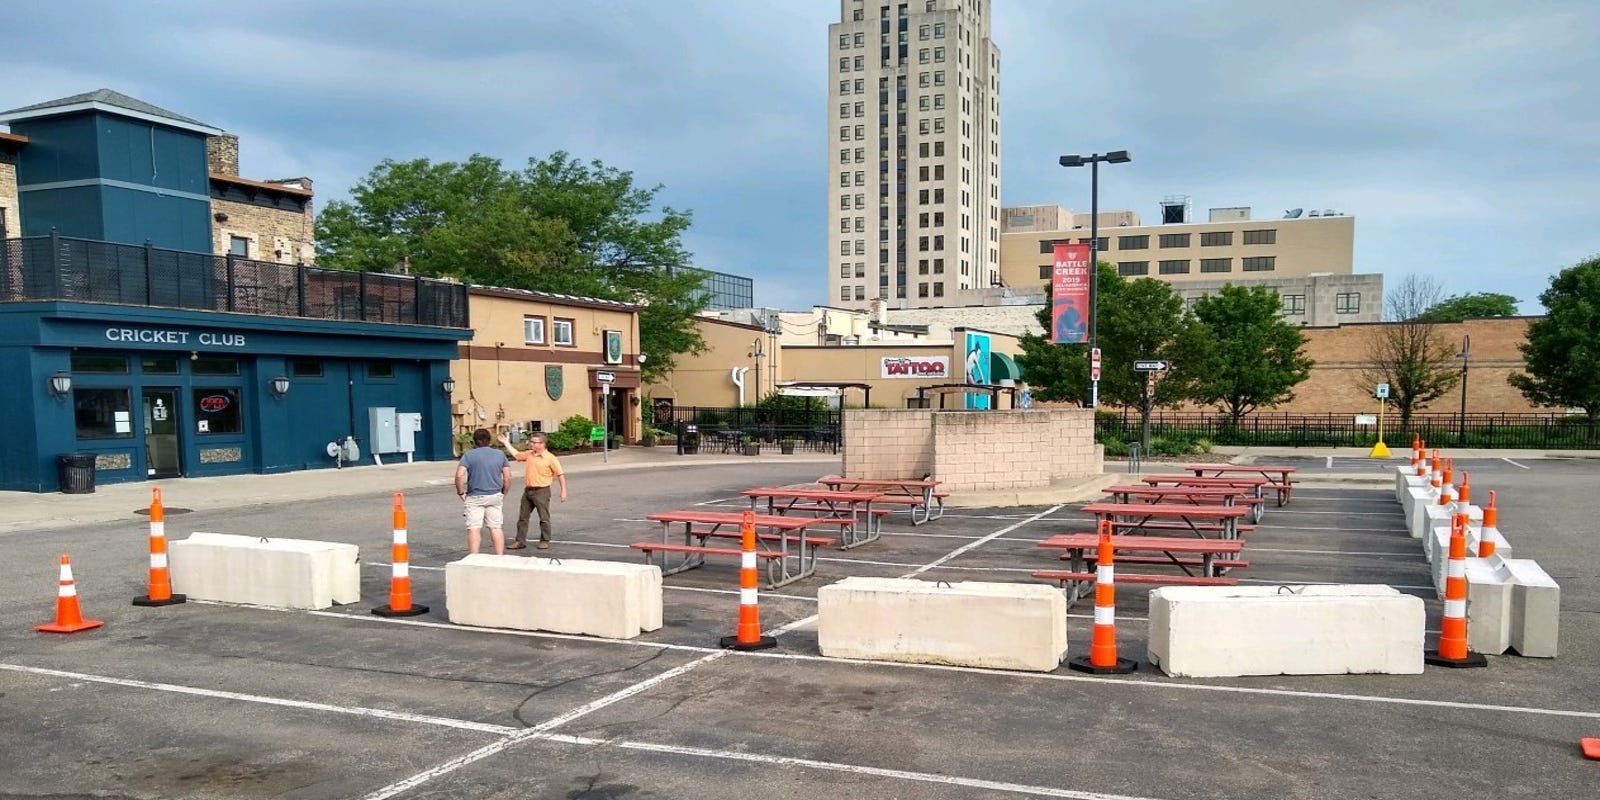 Battle Creek parking is now outdoor seating for downtown restaurants